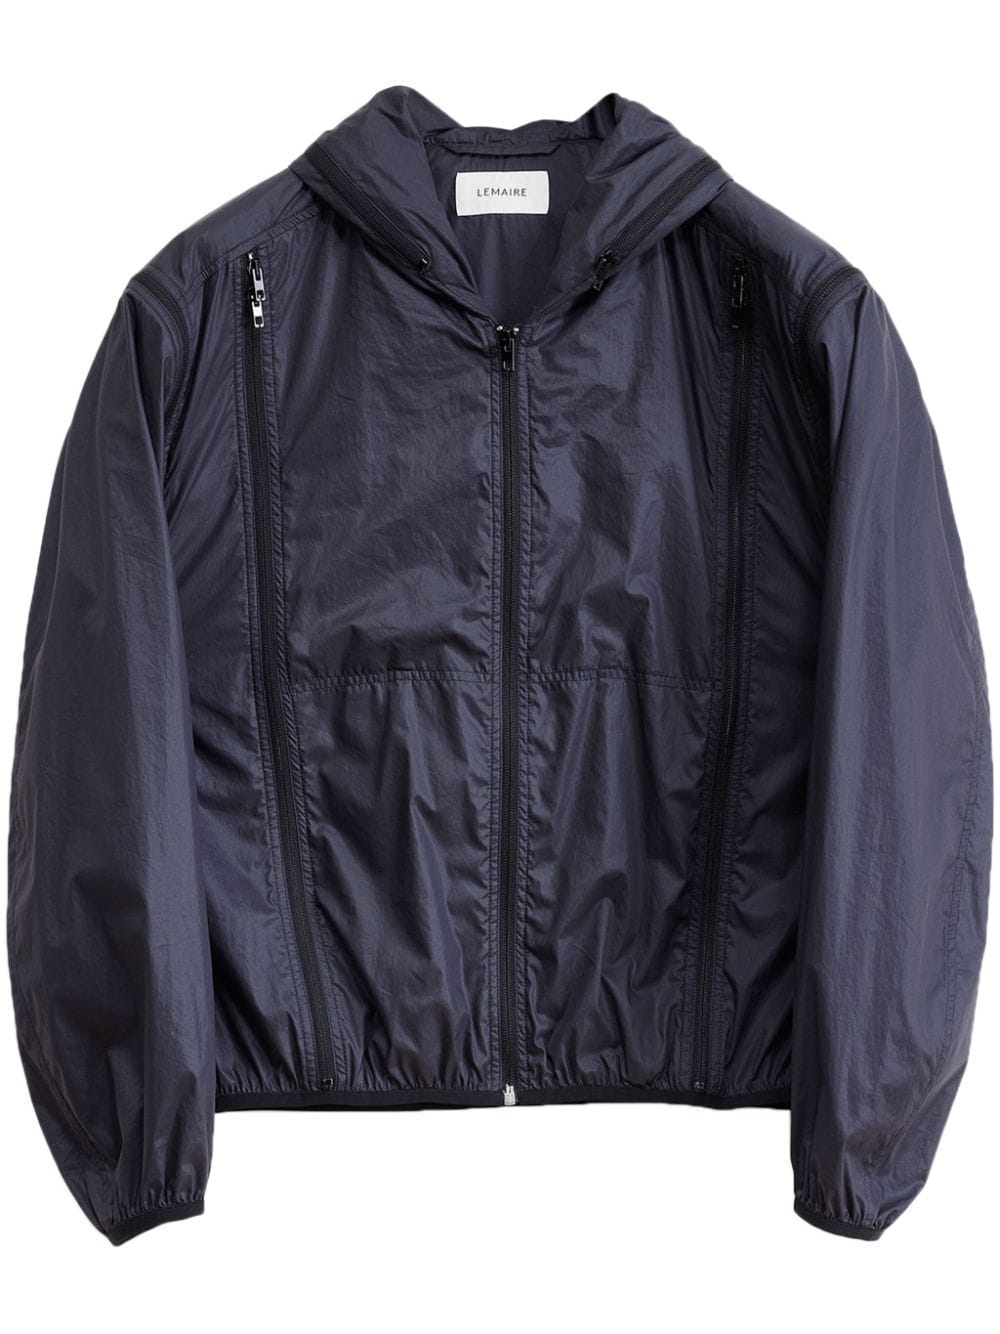 LEMAIRE zipped hooded jacket - Blue von LEMAIRE